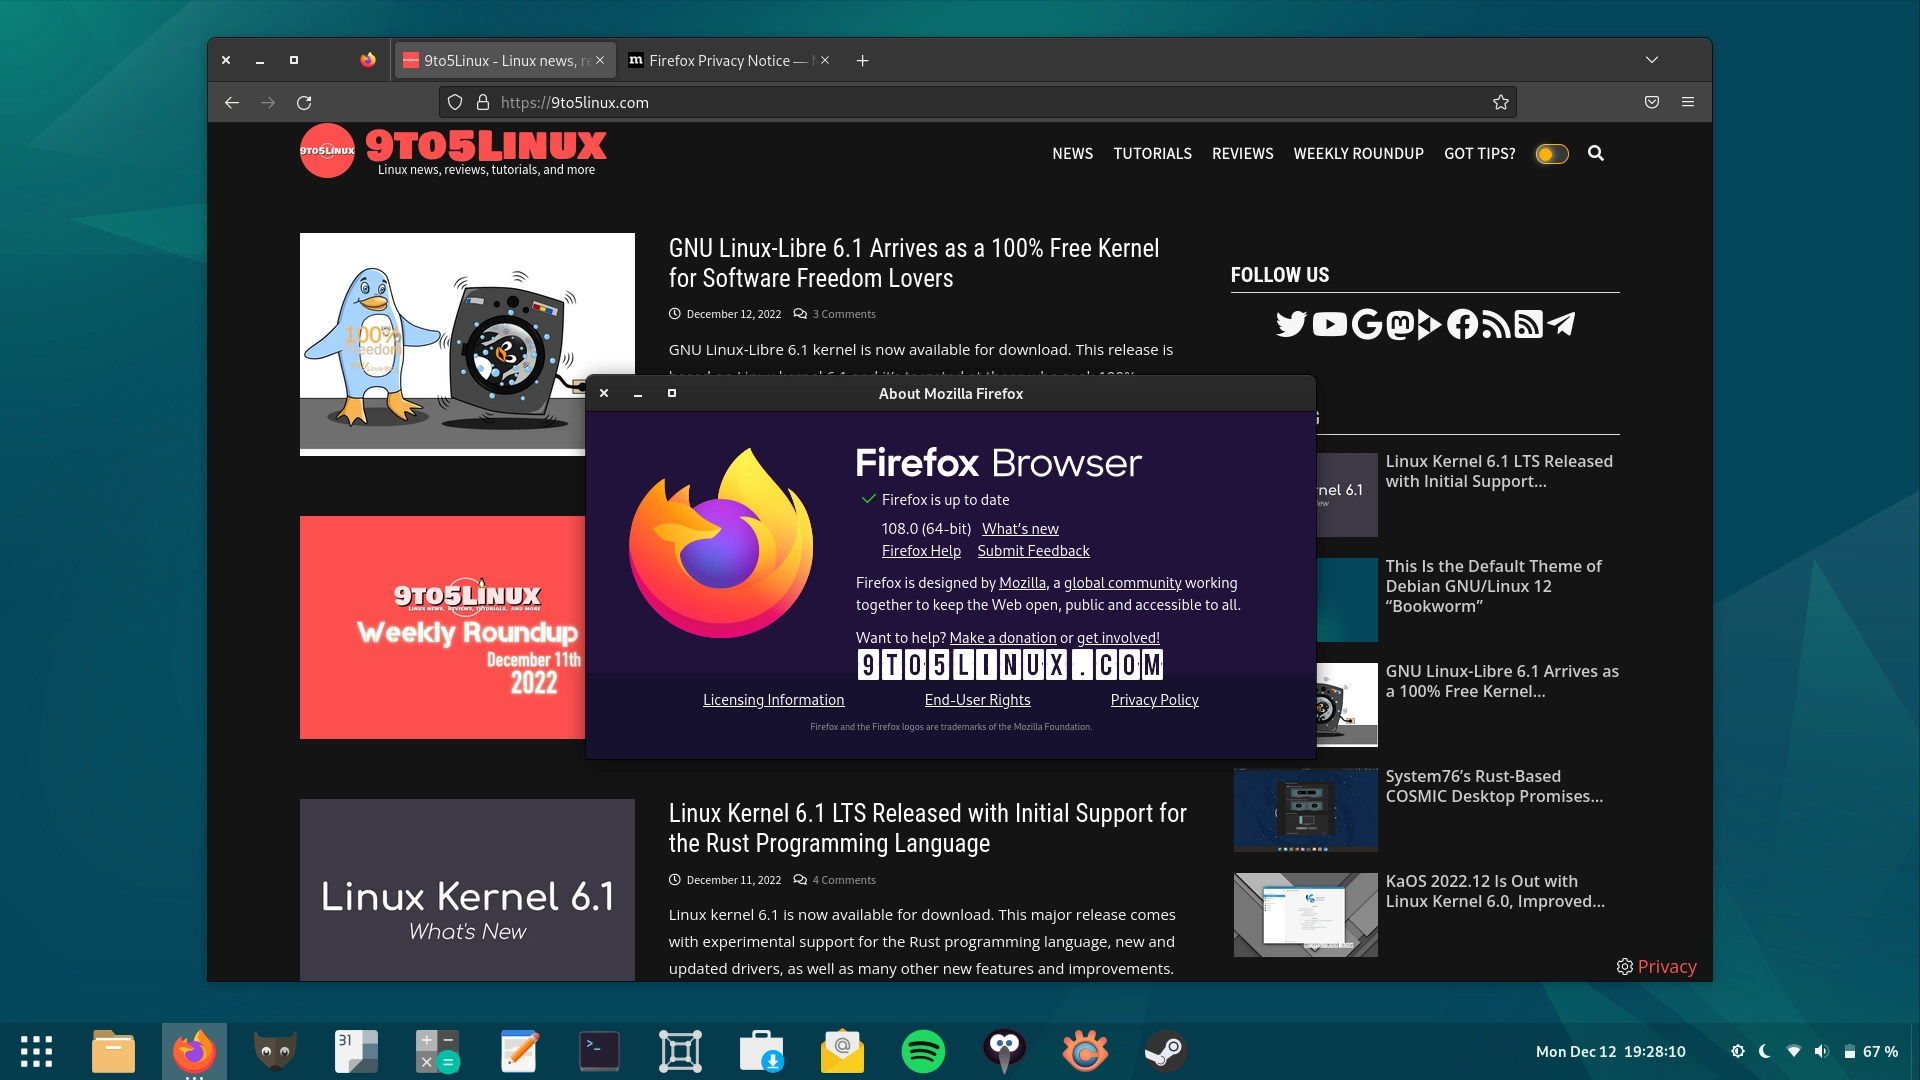 Firefox 108 Is Now Available for Download, This Is What’s New